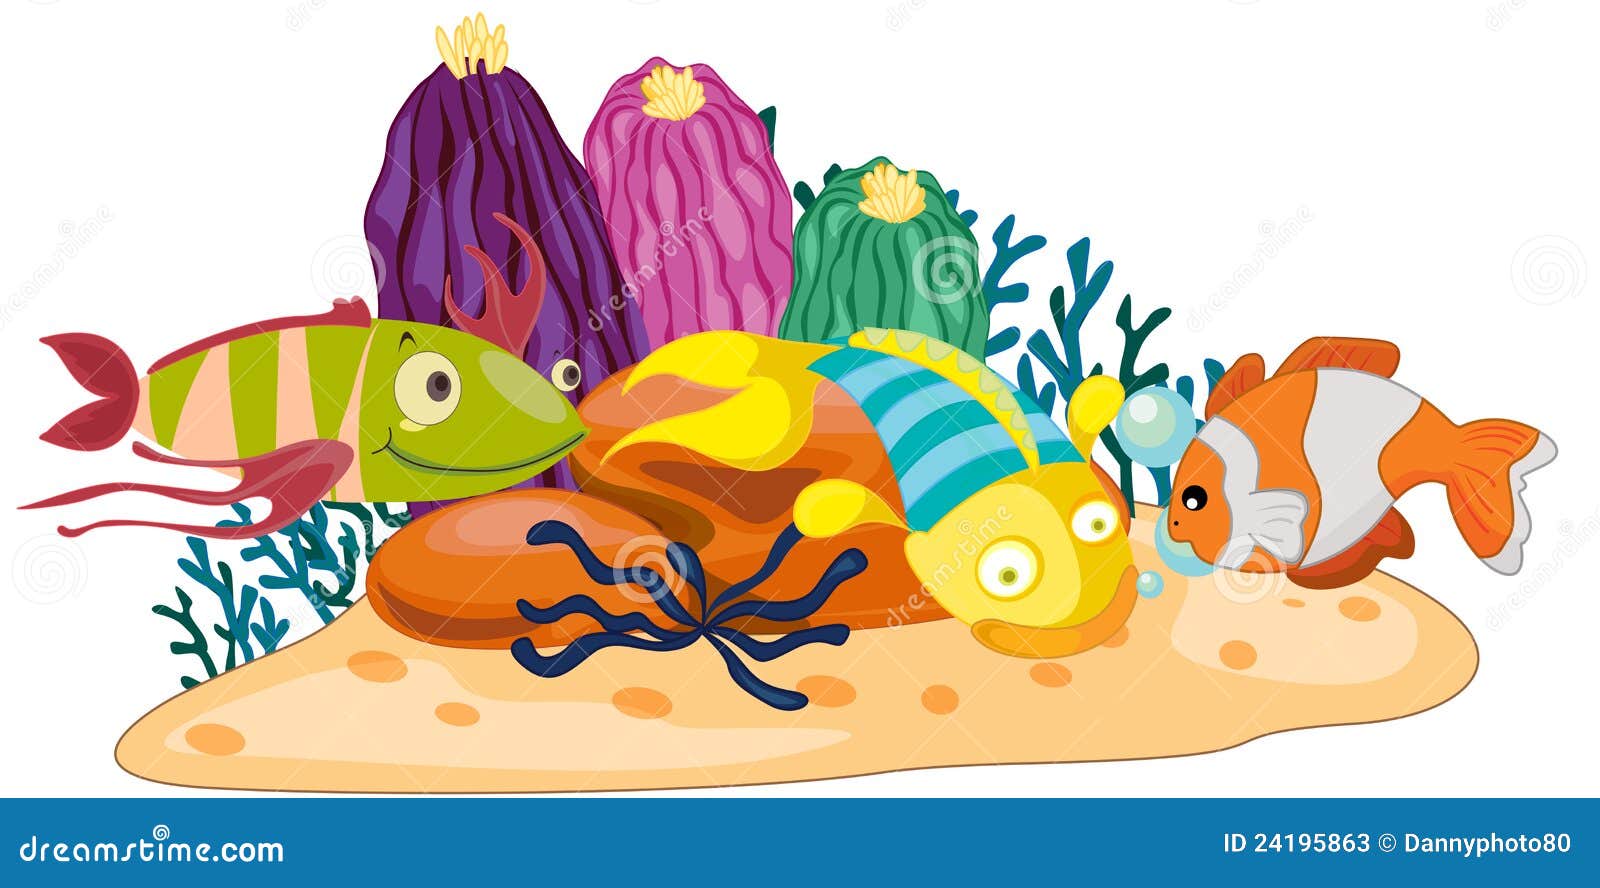 coral reef clipart free image search results